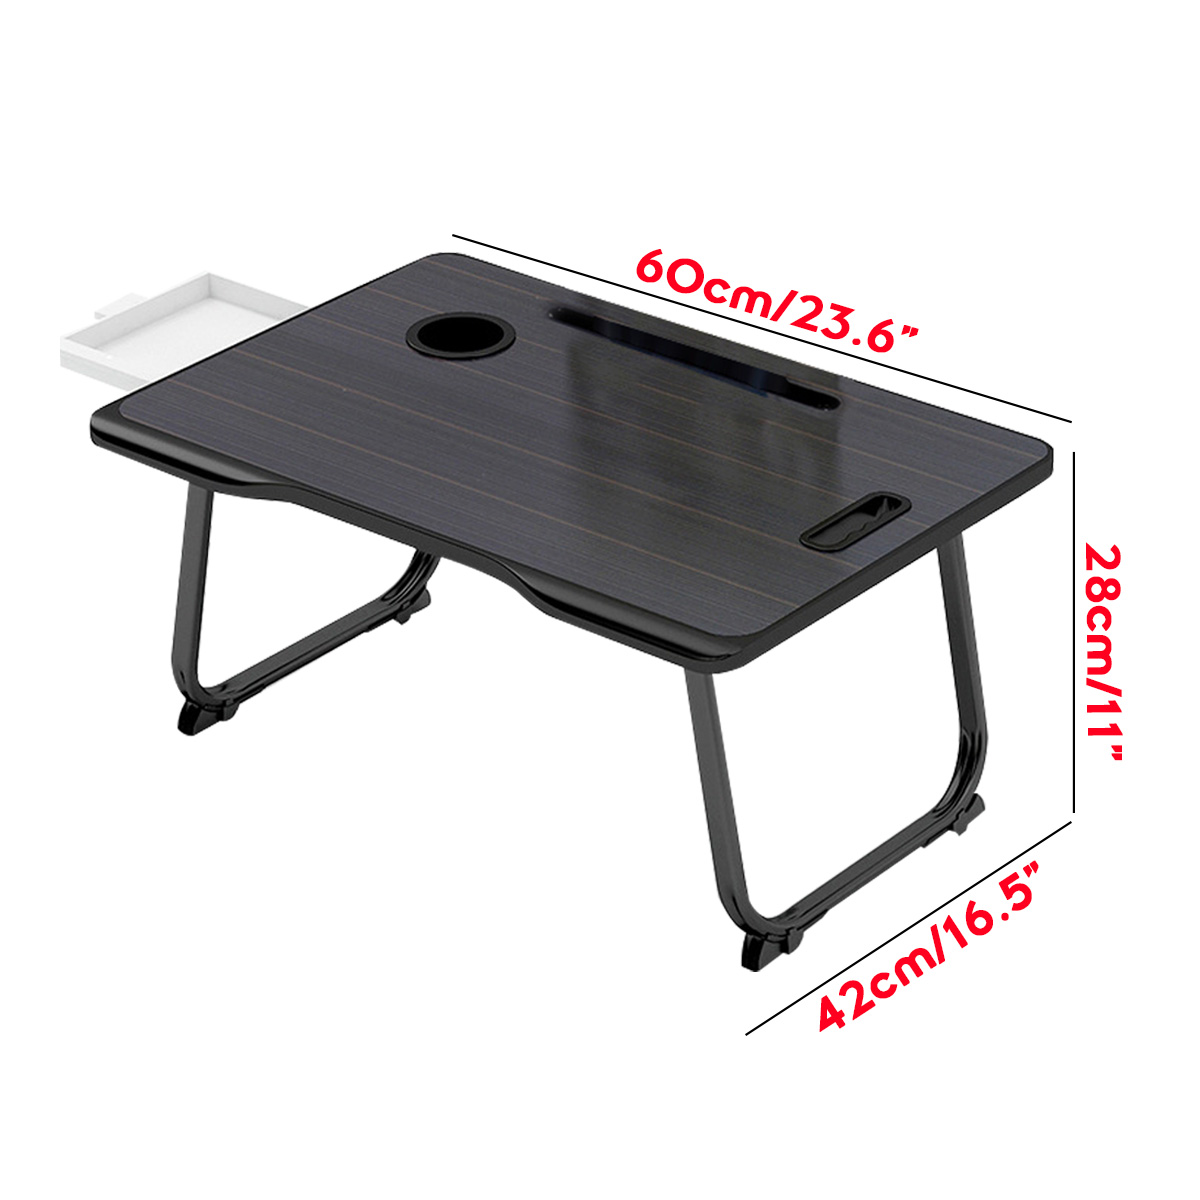 Folding-Laptop-Table-Desk-Notebook-Learning-Writing-Desk-with-Small-Drawer-Cup-Slot-Lap-Desk-Bed-for-1761880-5